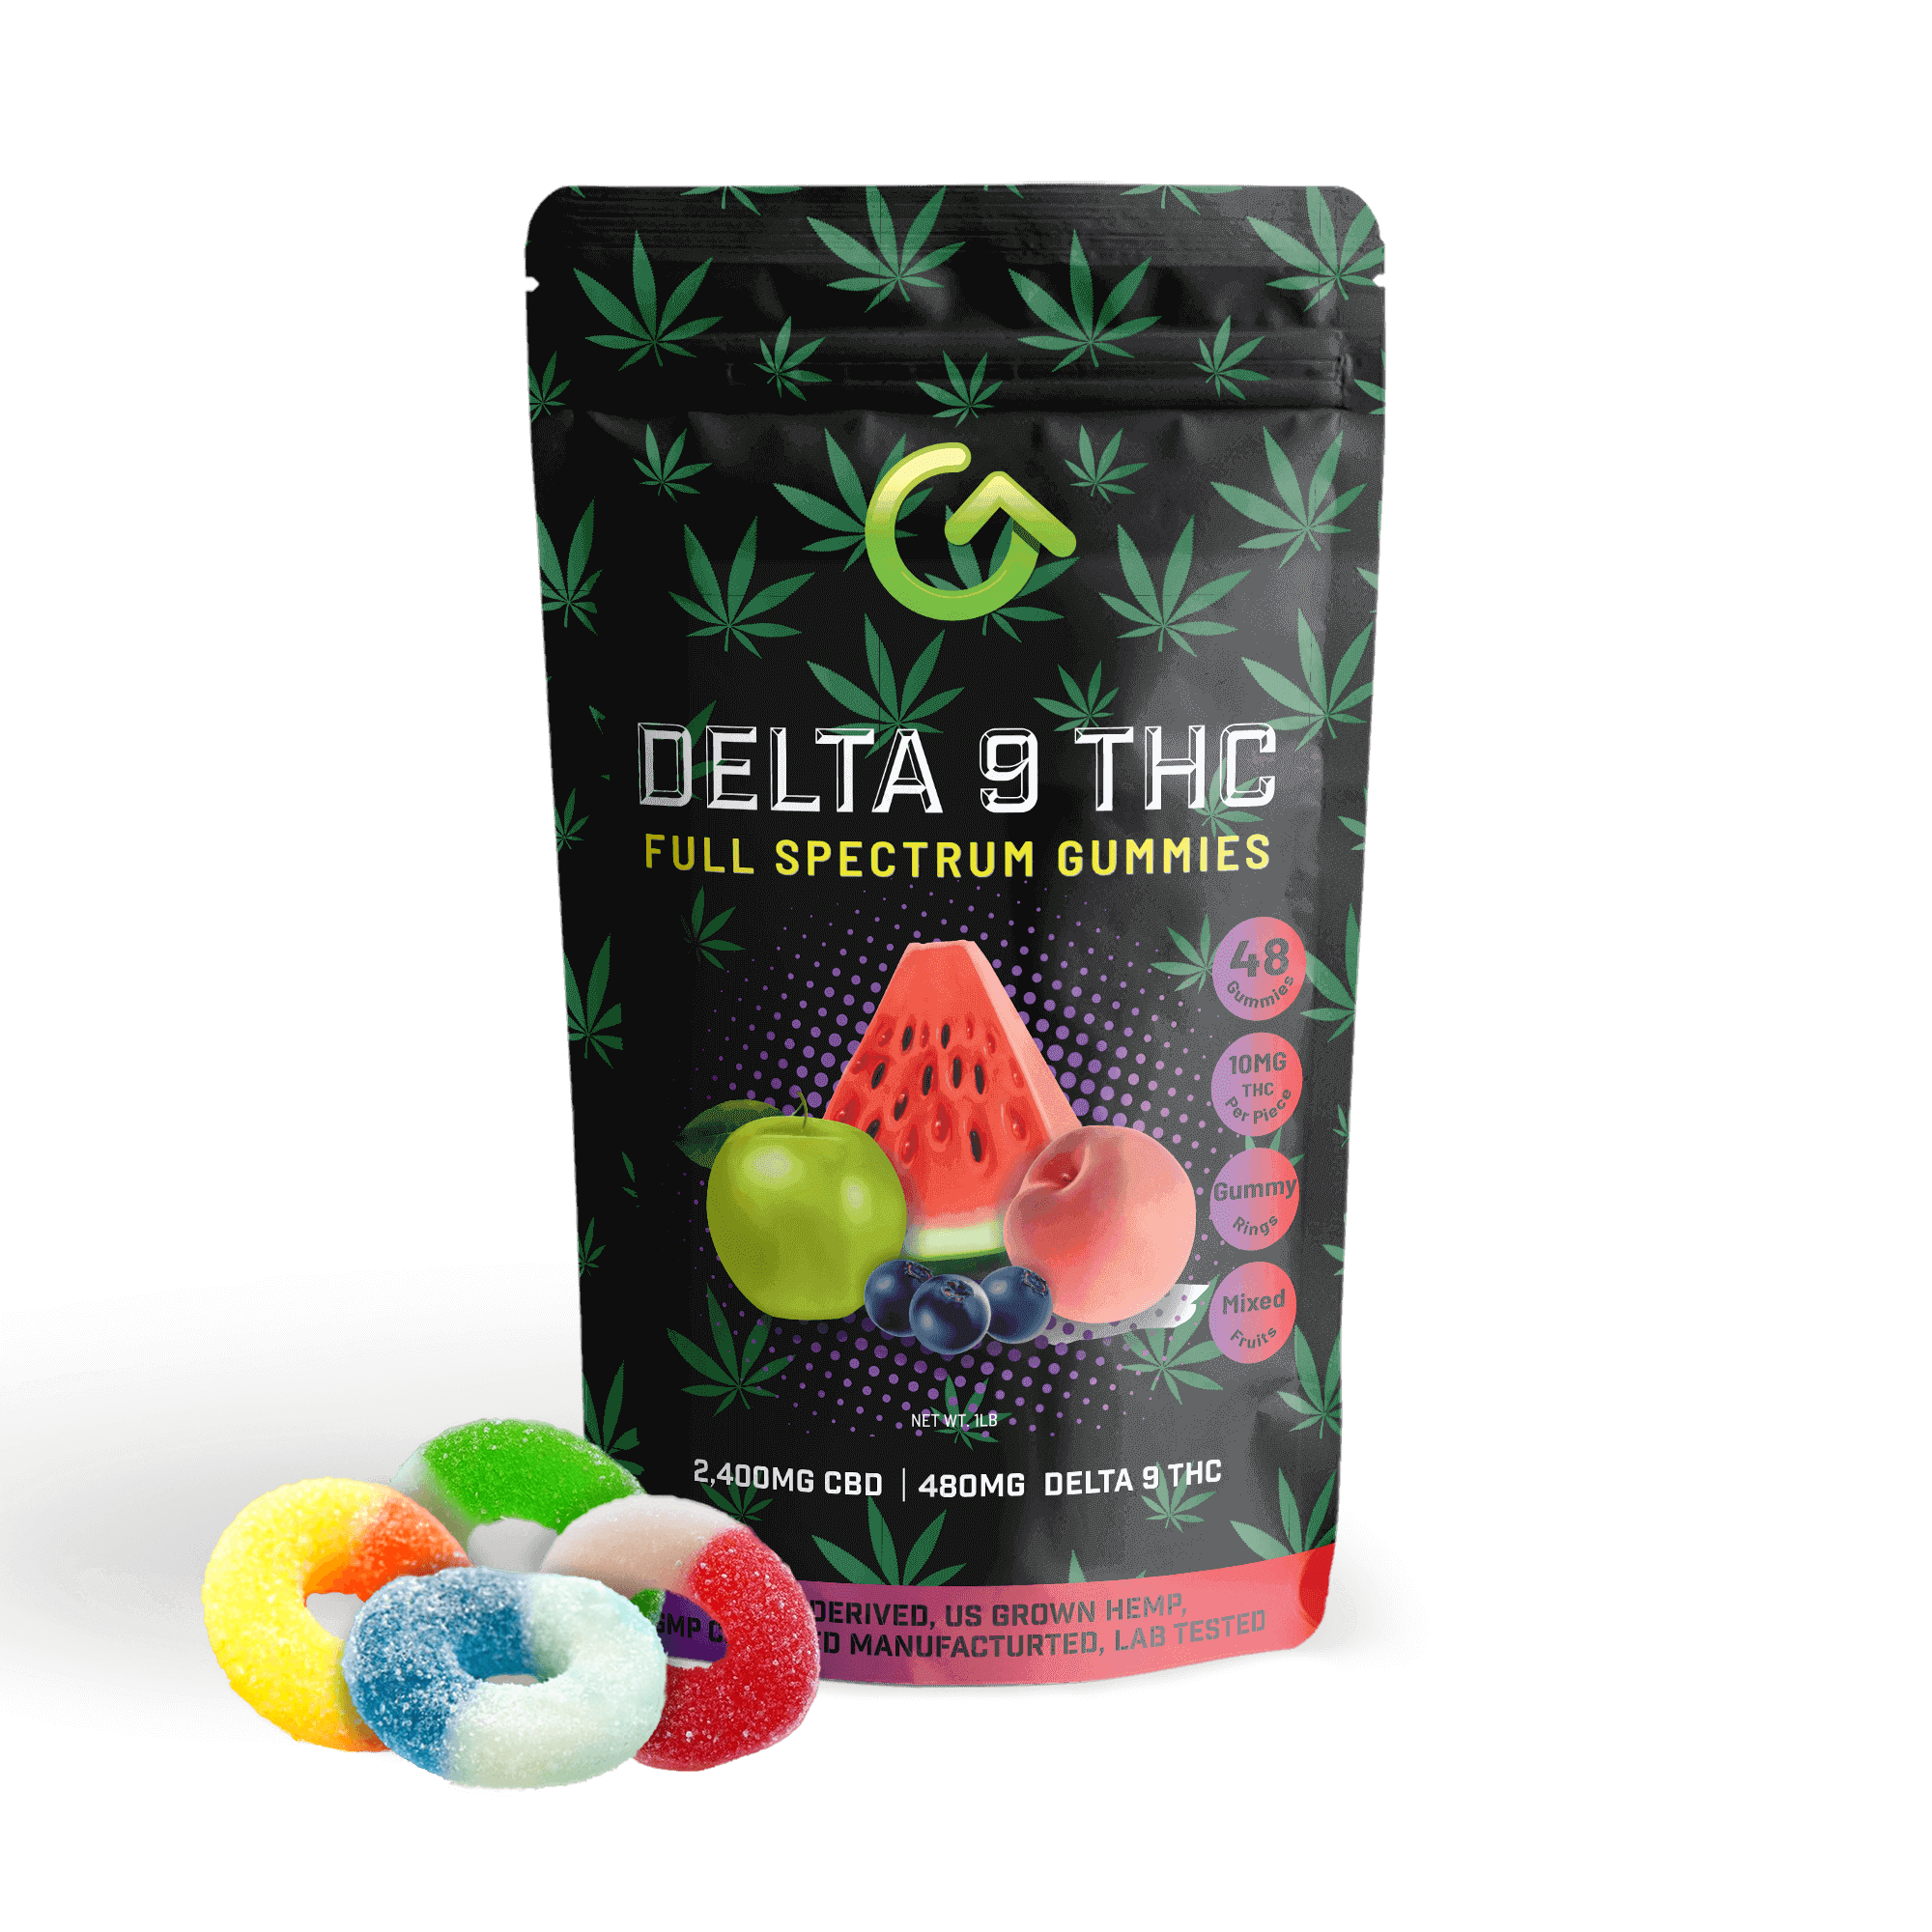 10mg delta 9 gummies from Good CBD come in a 1lb bag and contain 48 gummies